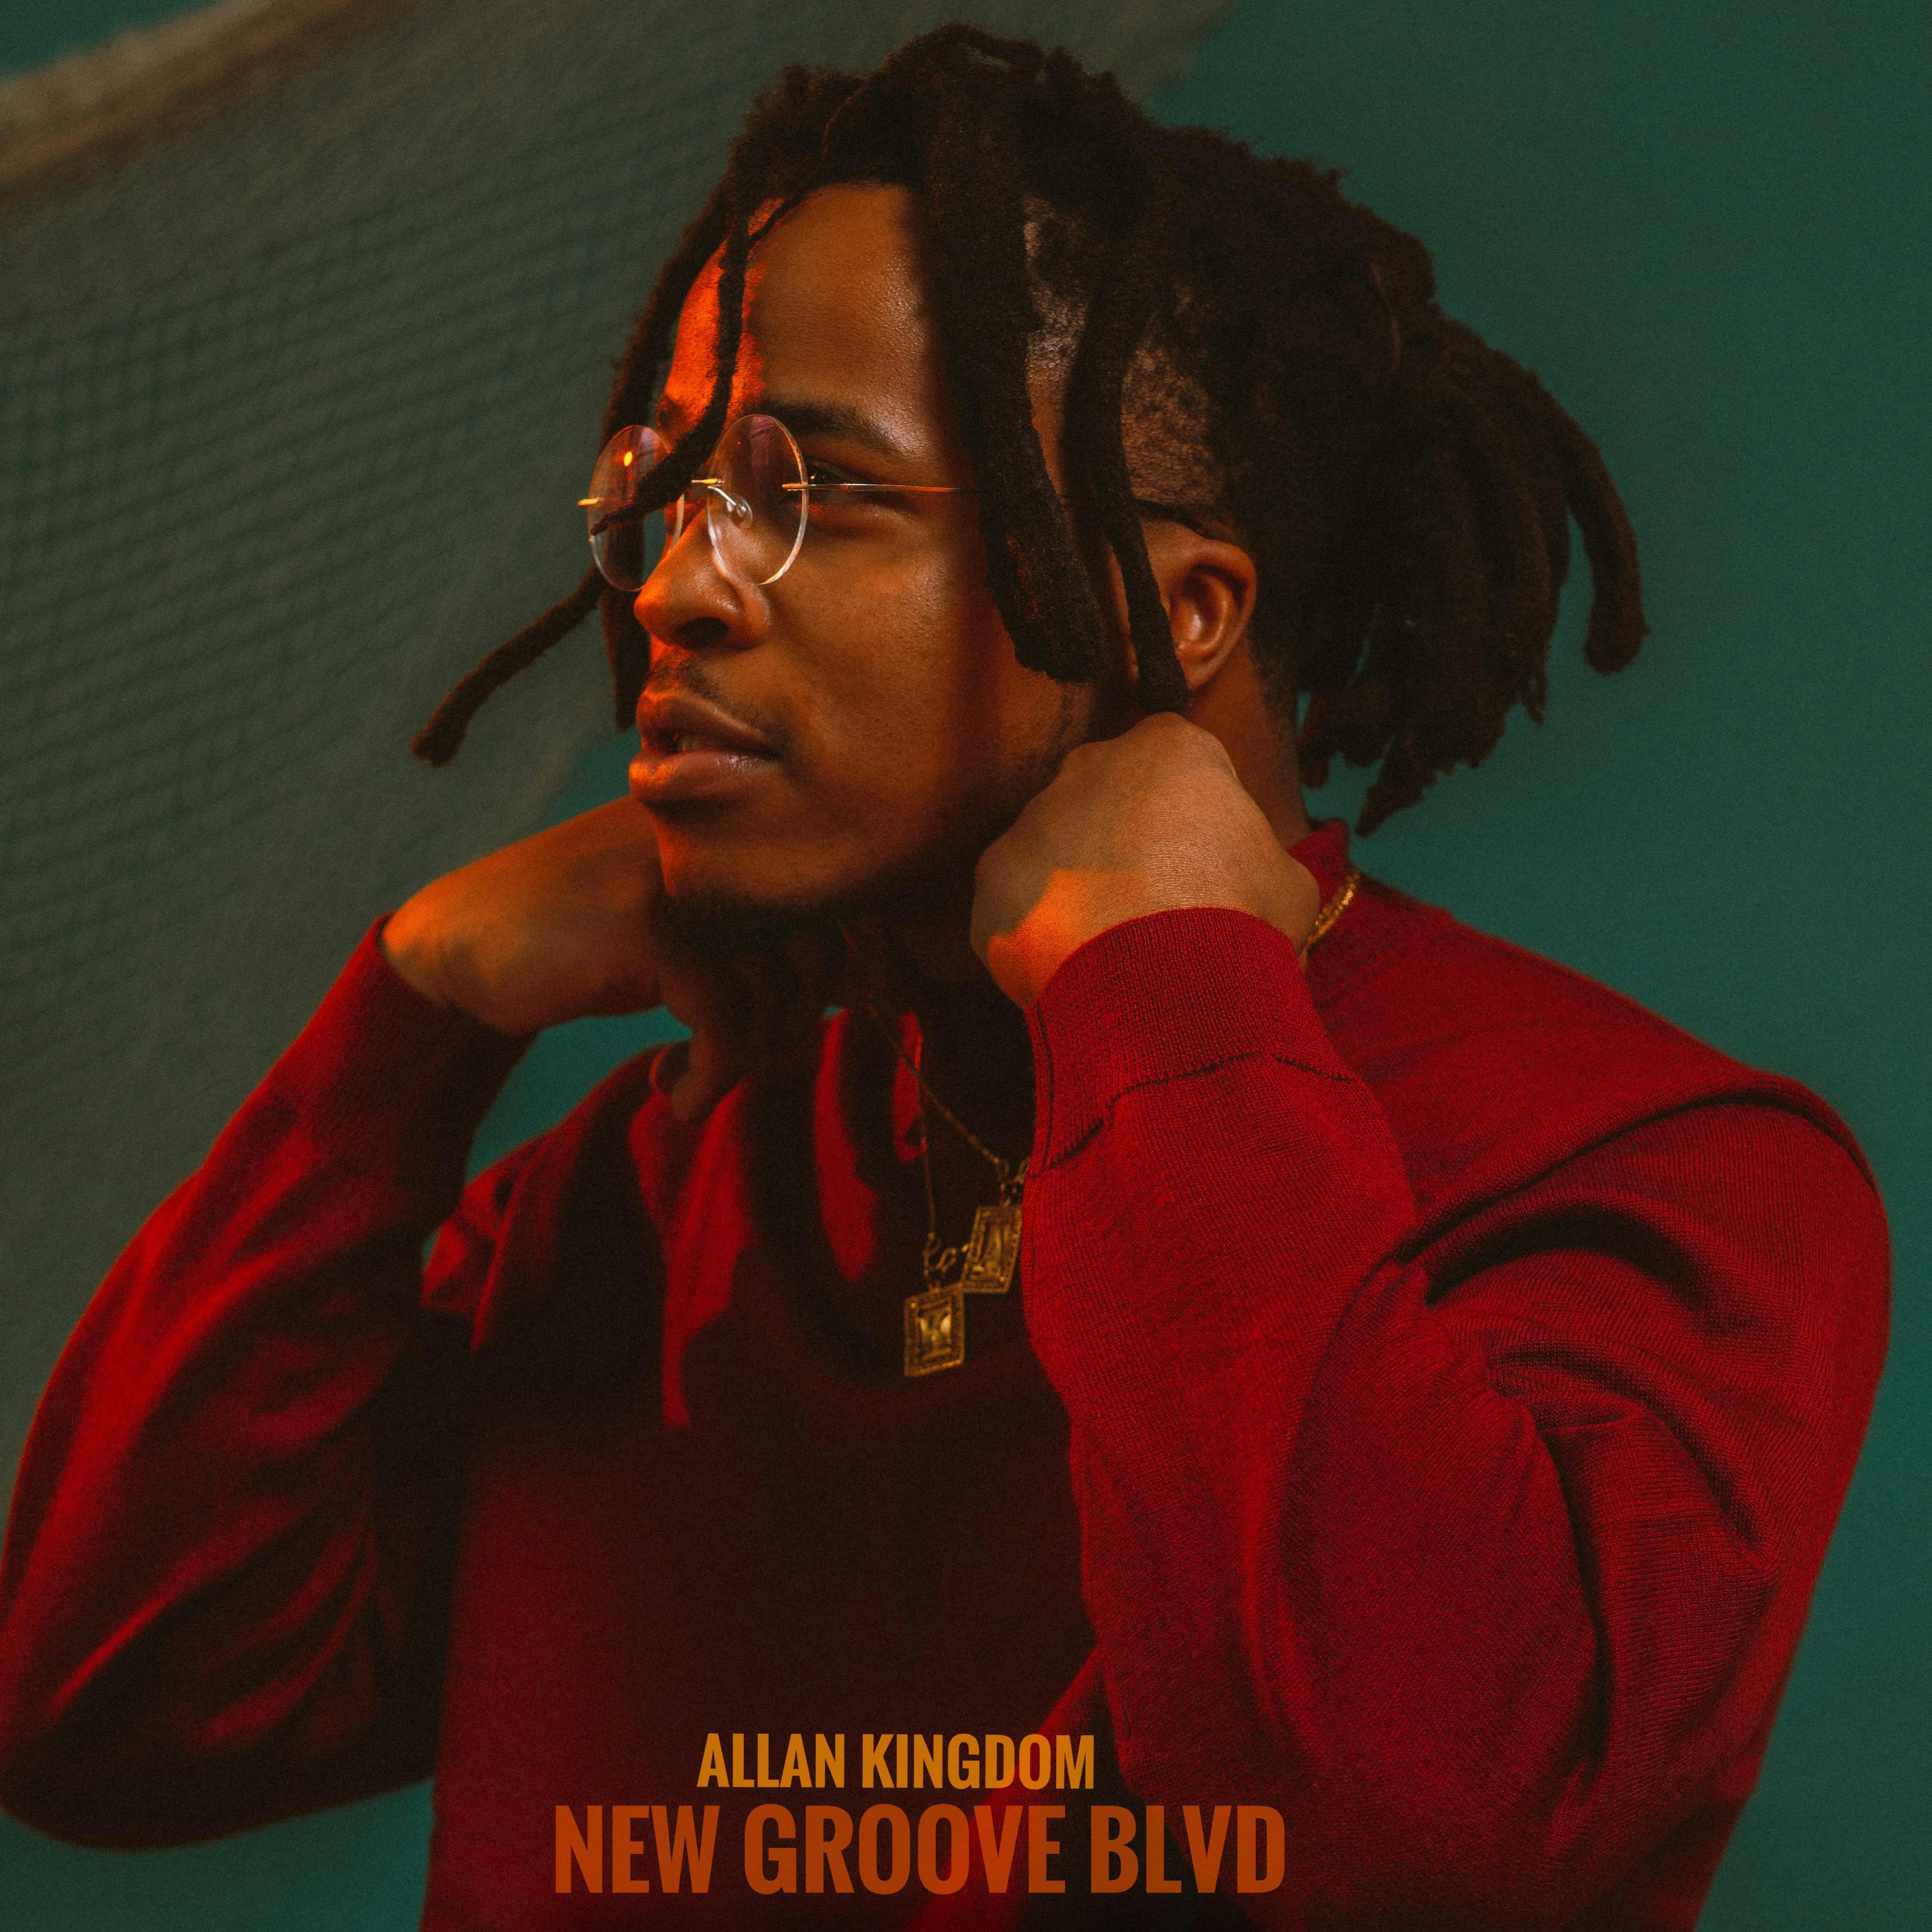 Cover art for Allan Kingdom's song: New Groove Blvd